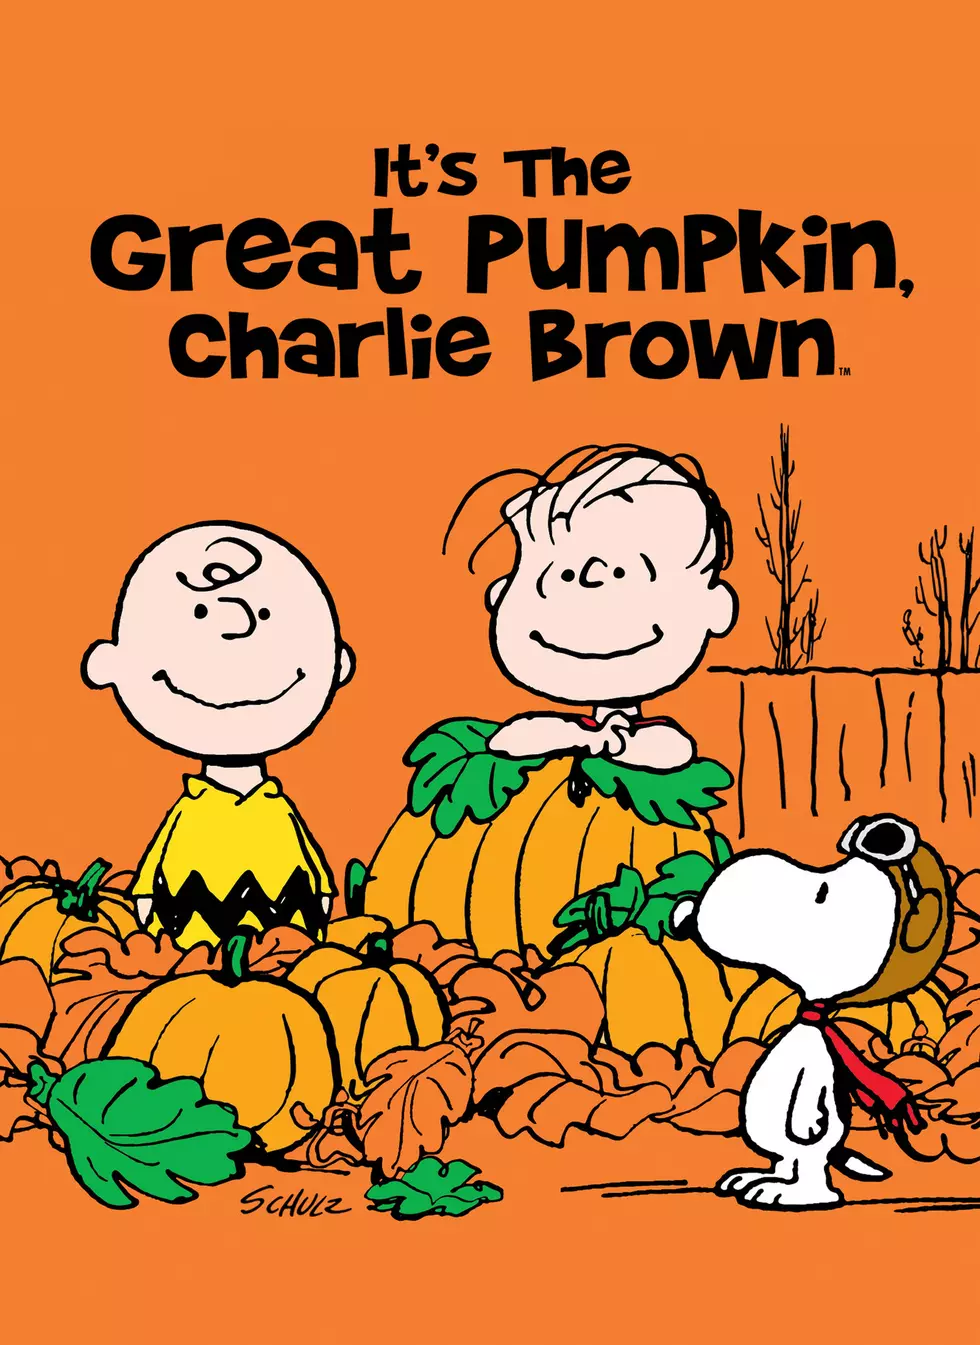 Things You Didn’t Know About It’s The Great Pumpkin Charlie Brown